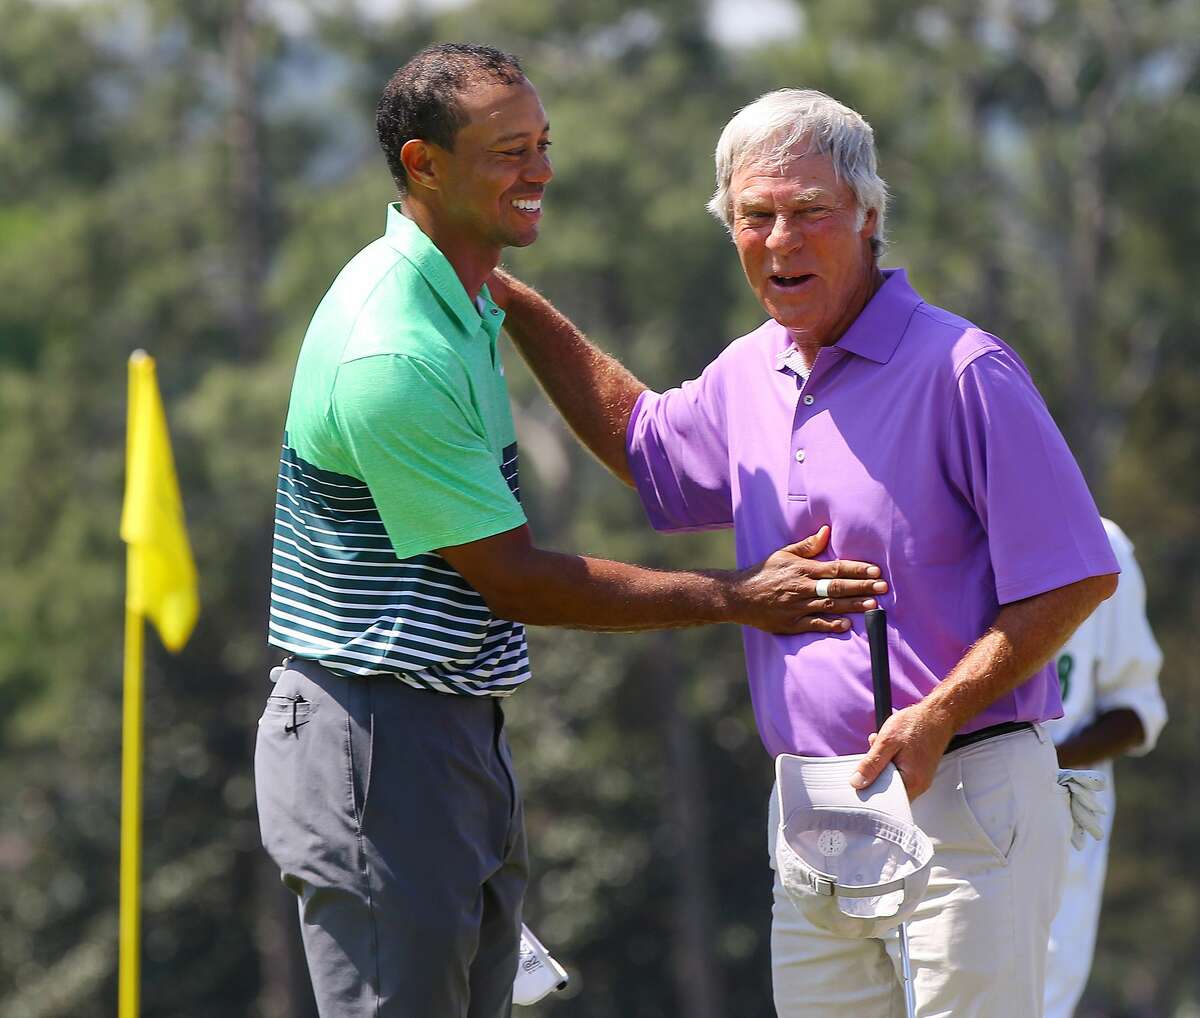 Tiger Woods, left, and Ben Crenshaw embrace on the 18th green as they finish a practice round for the Masters on Wednesday in Augusta, Ga.